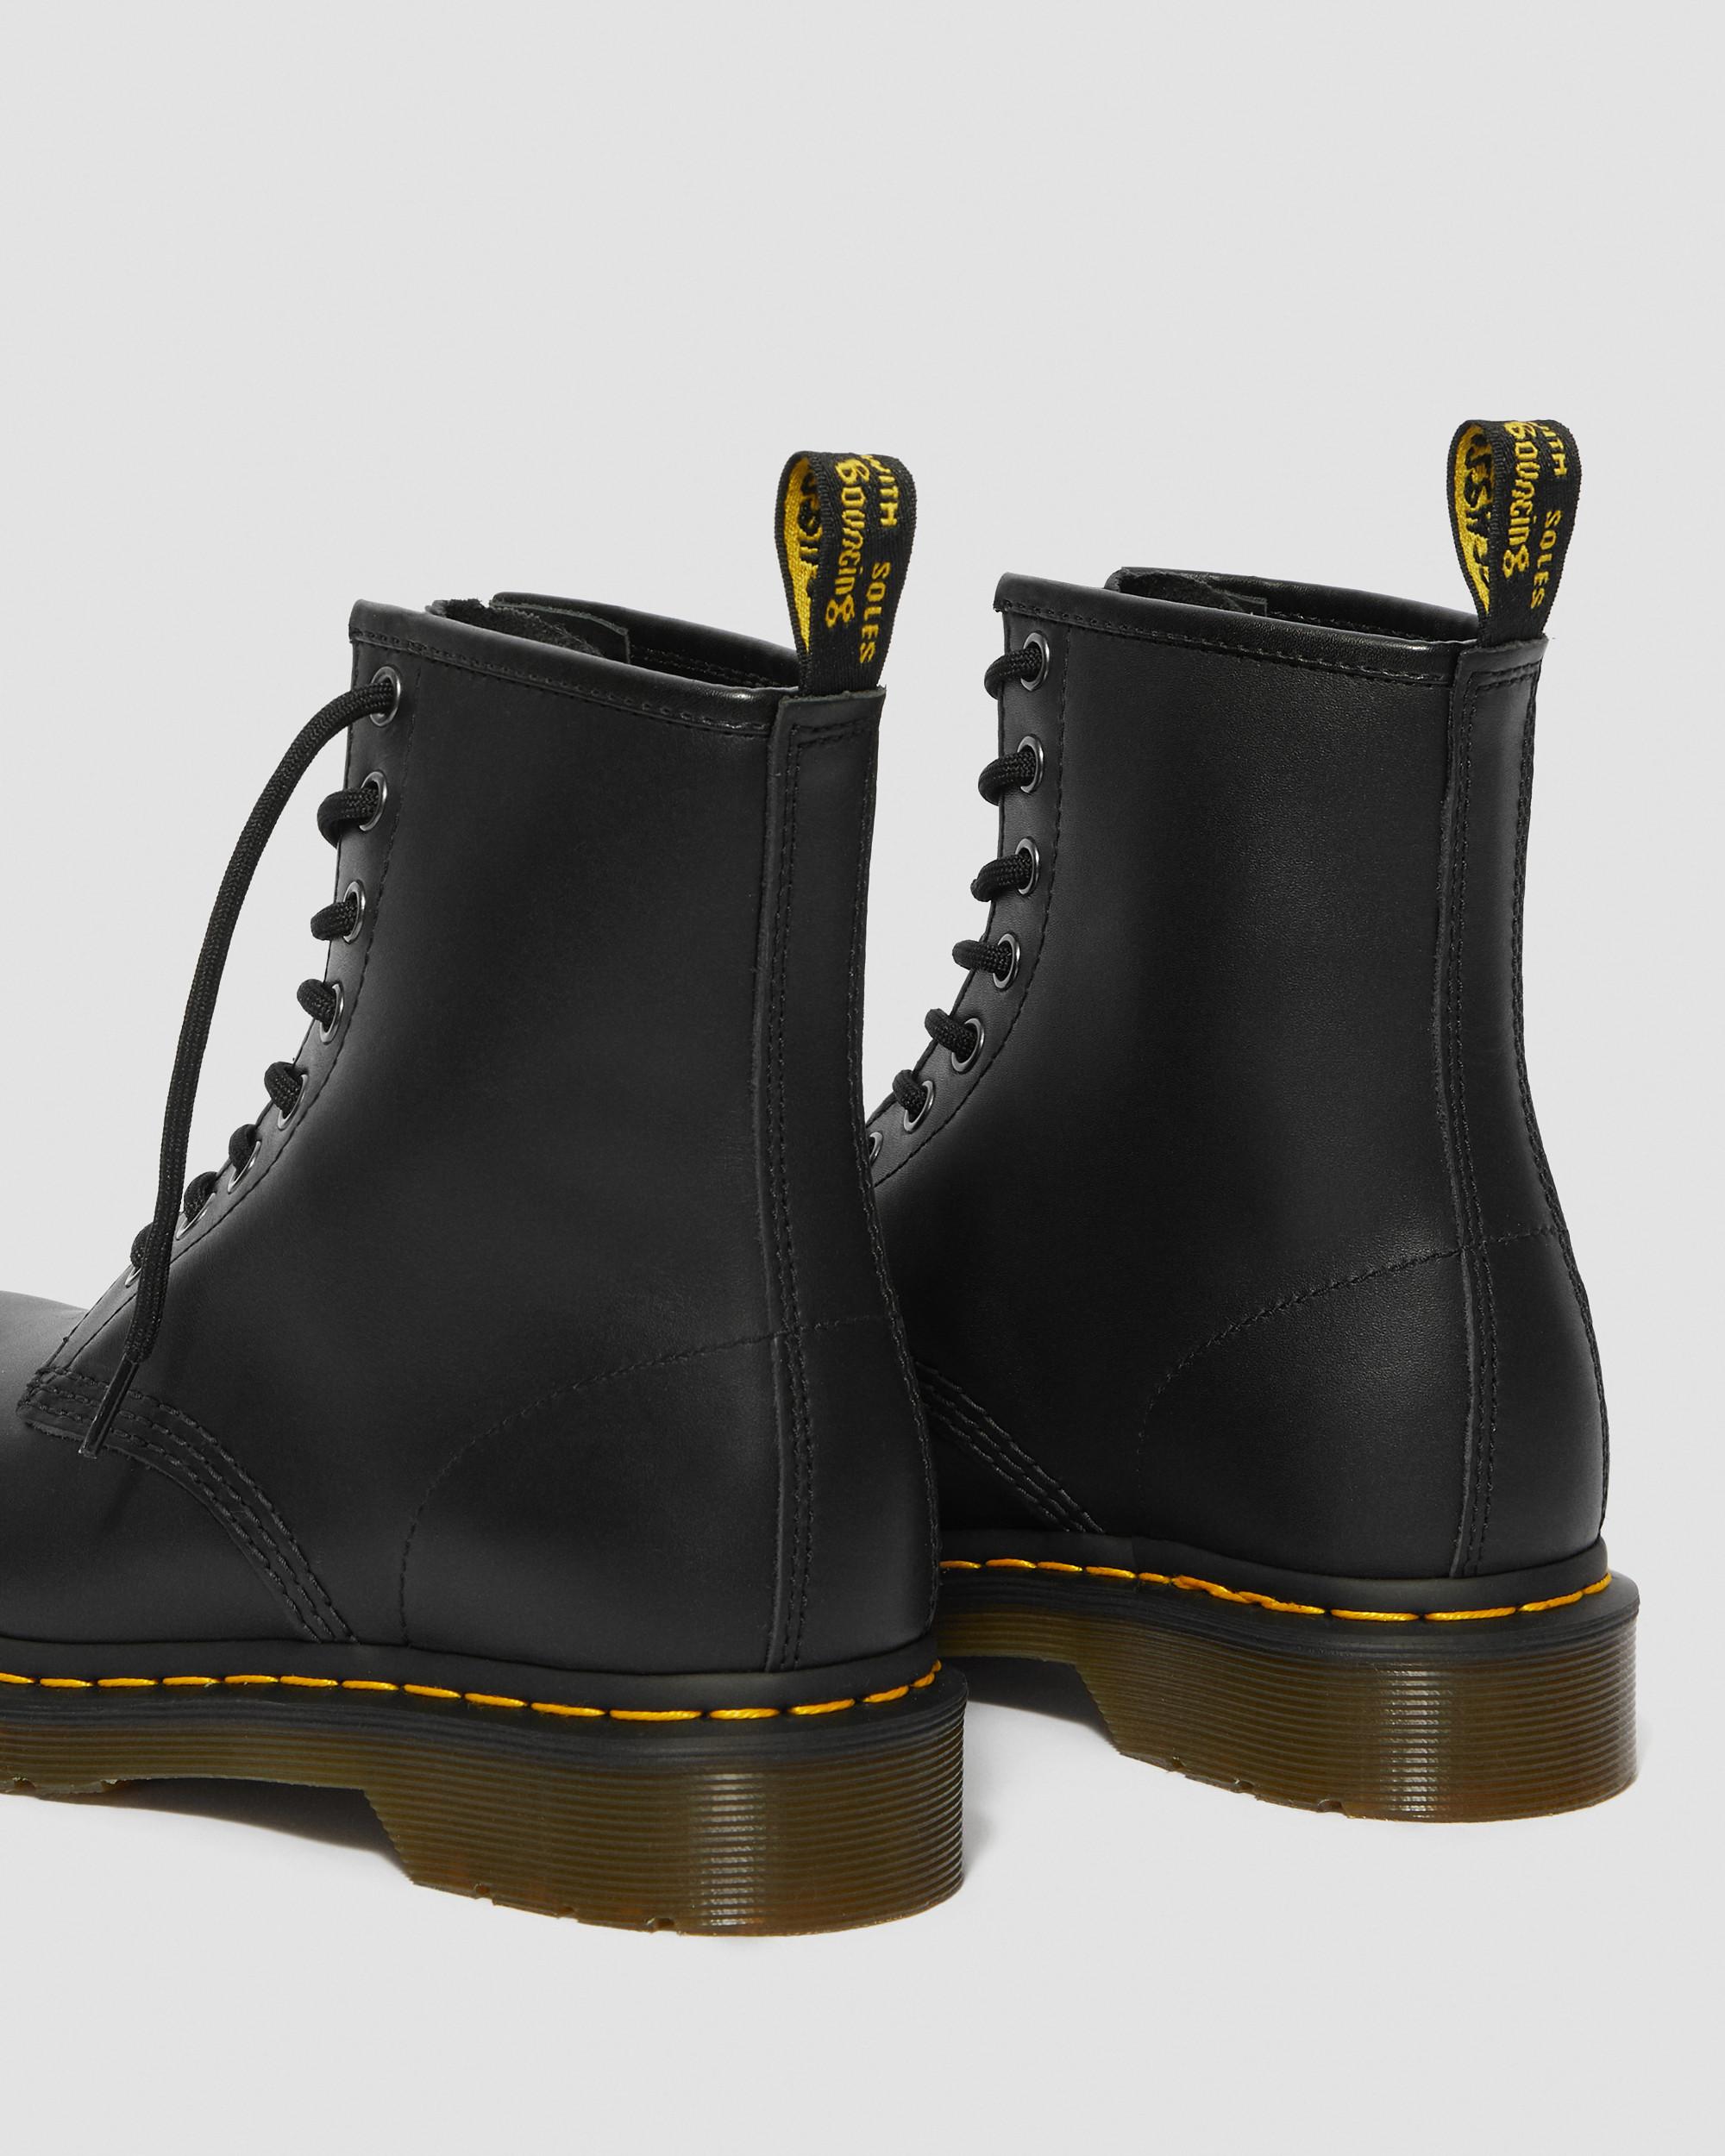 1460 Women's Nappa Leather Lace Up Boots in Black | Dr. Martens